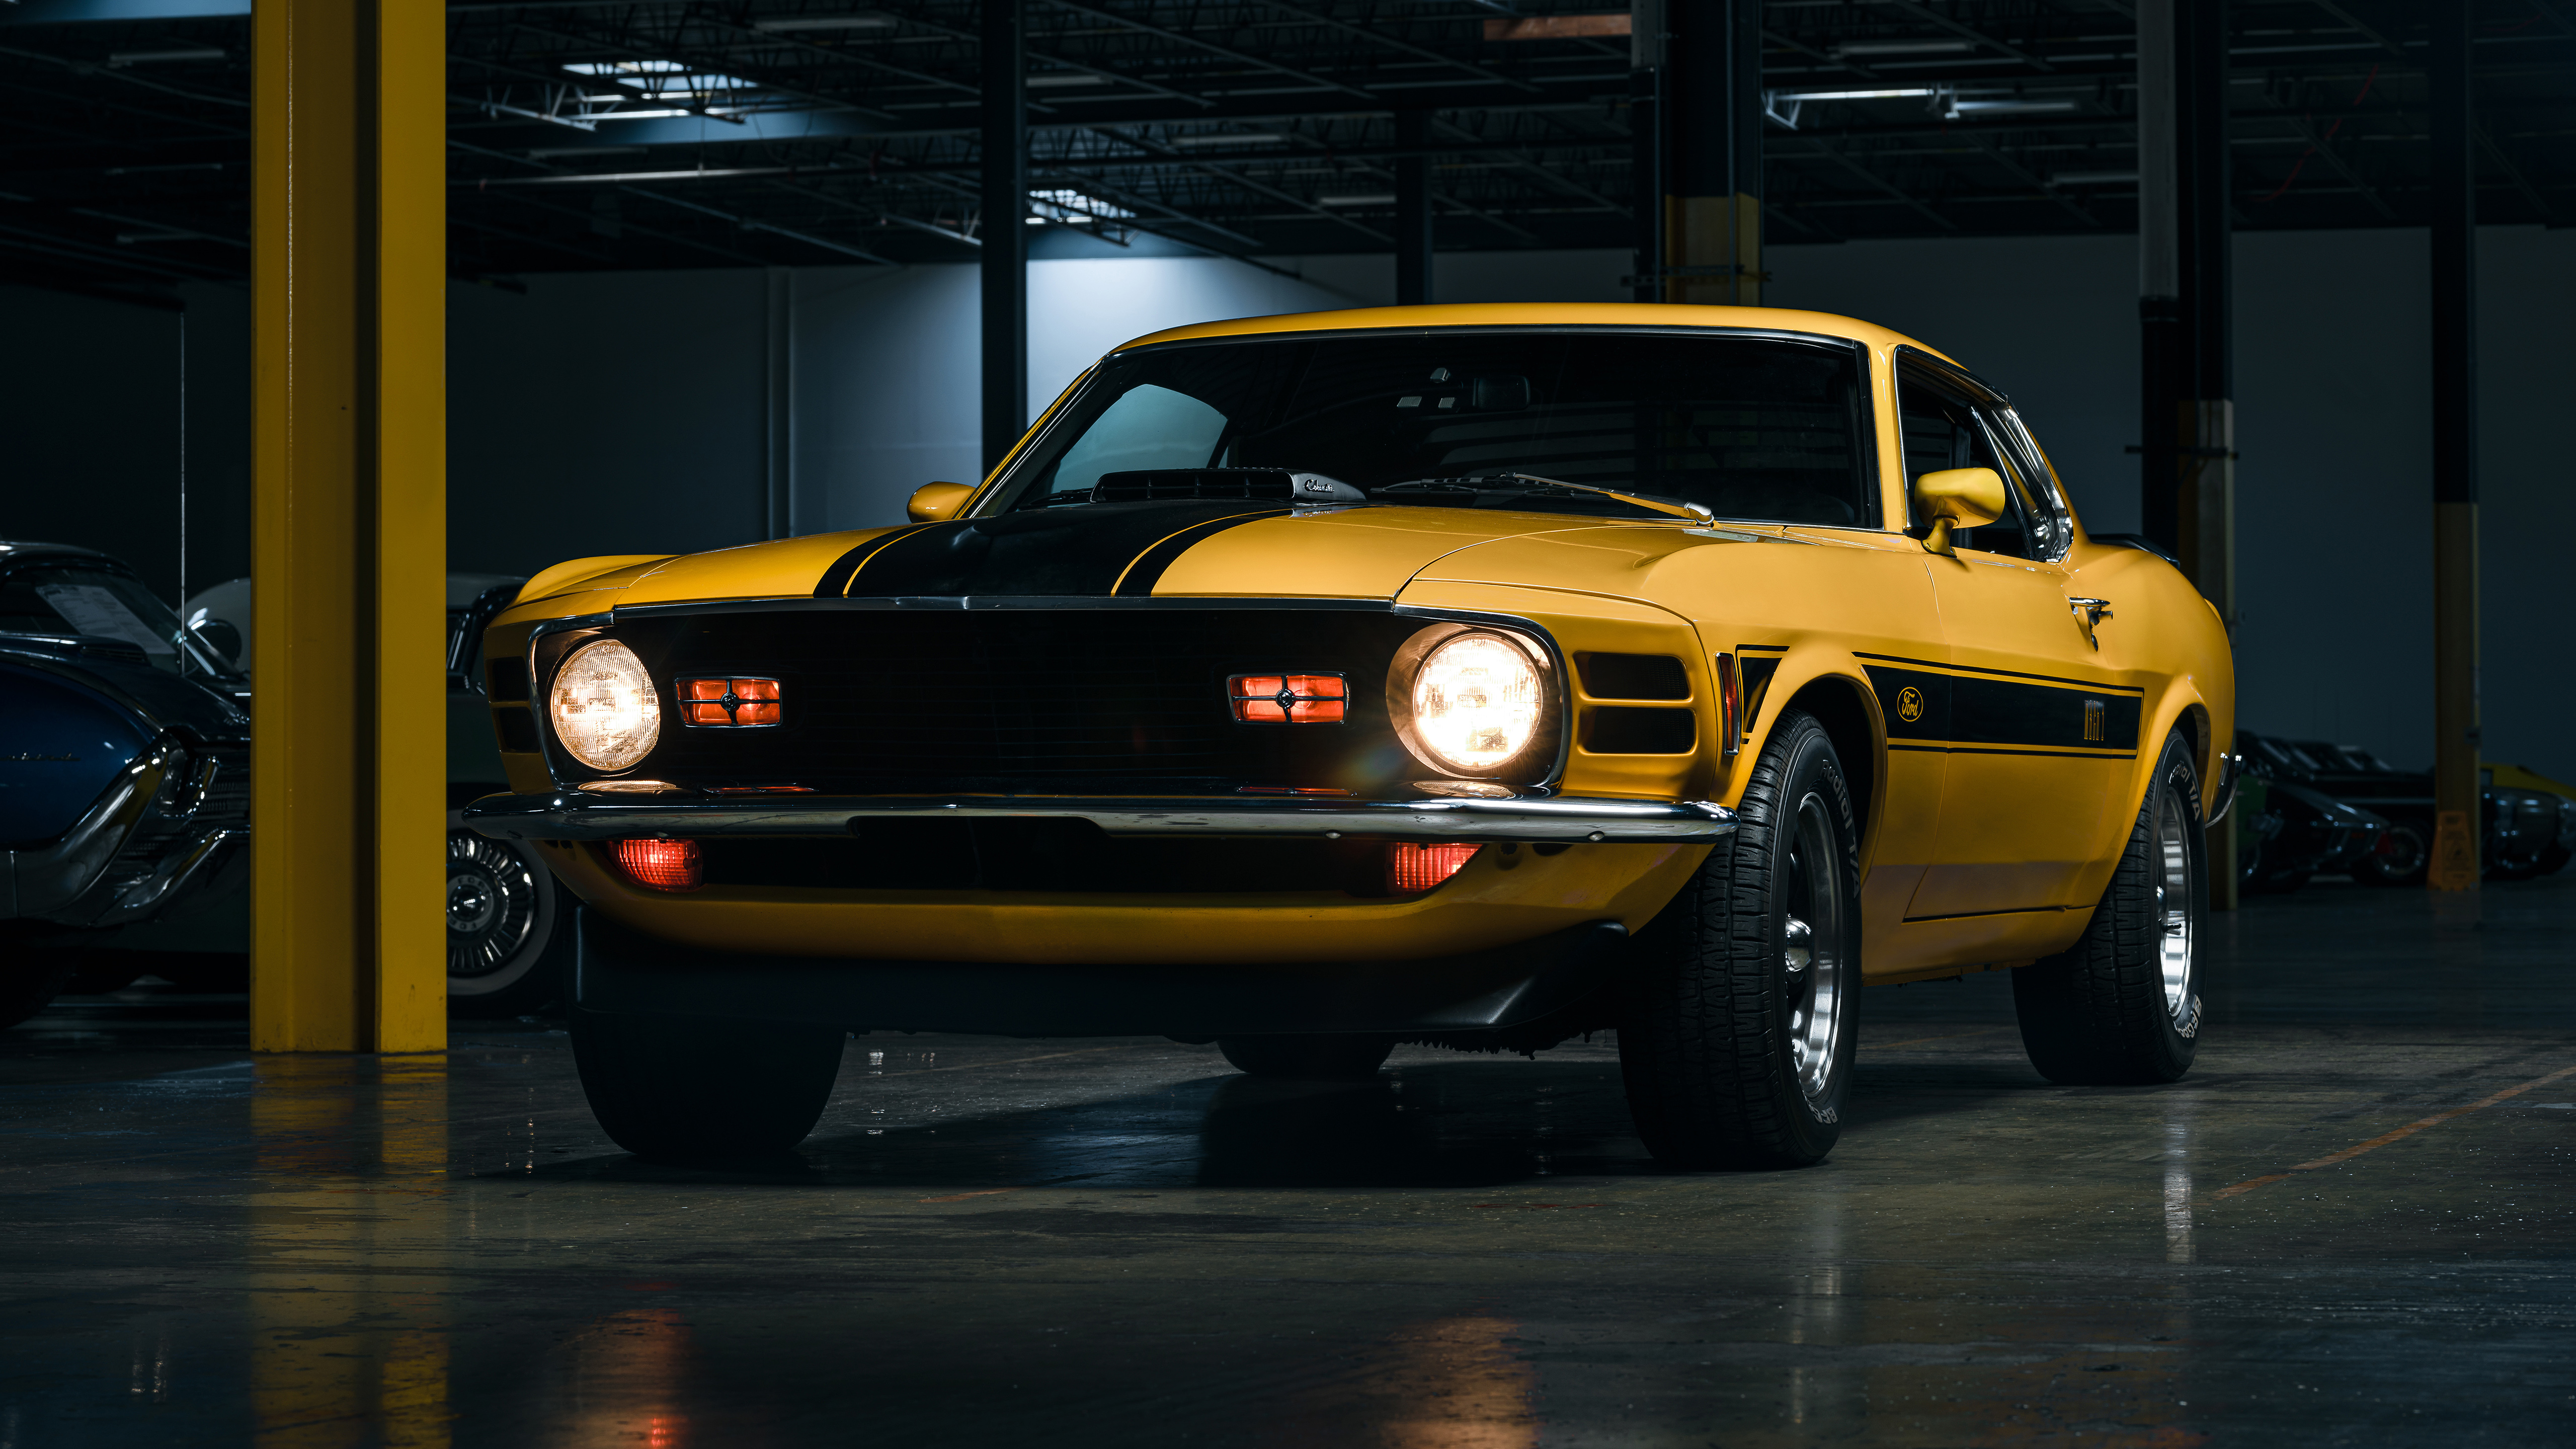 Ford Mustang Mach 1 Ford Mustang Ford Car Muscle Cars Yellow Cars Low Light Parking Lot 5120x2880